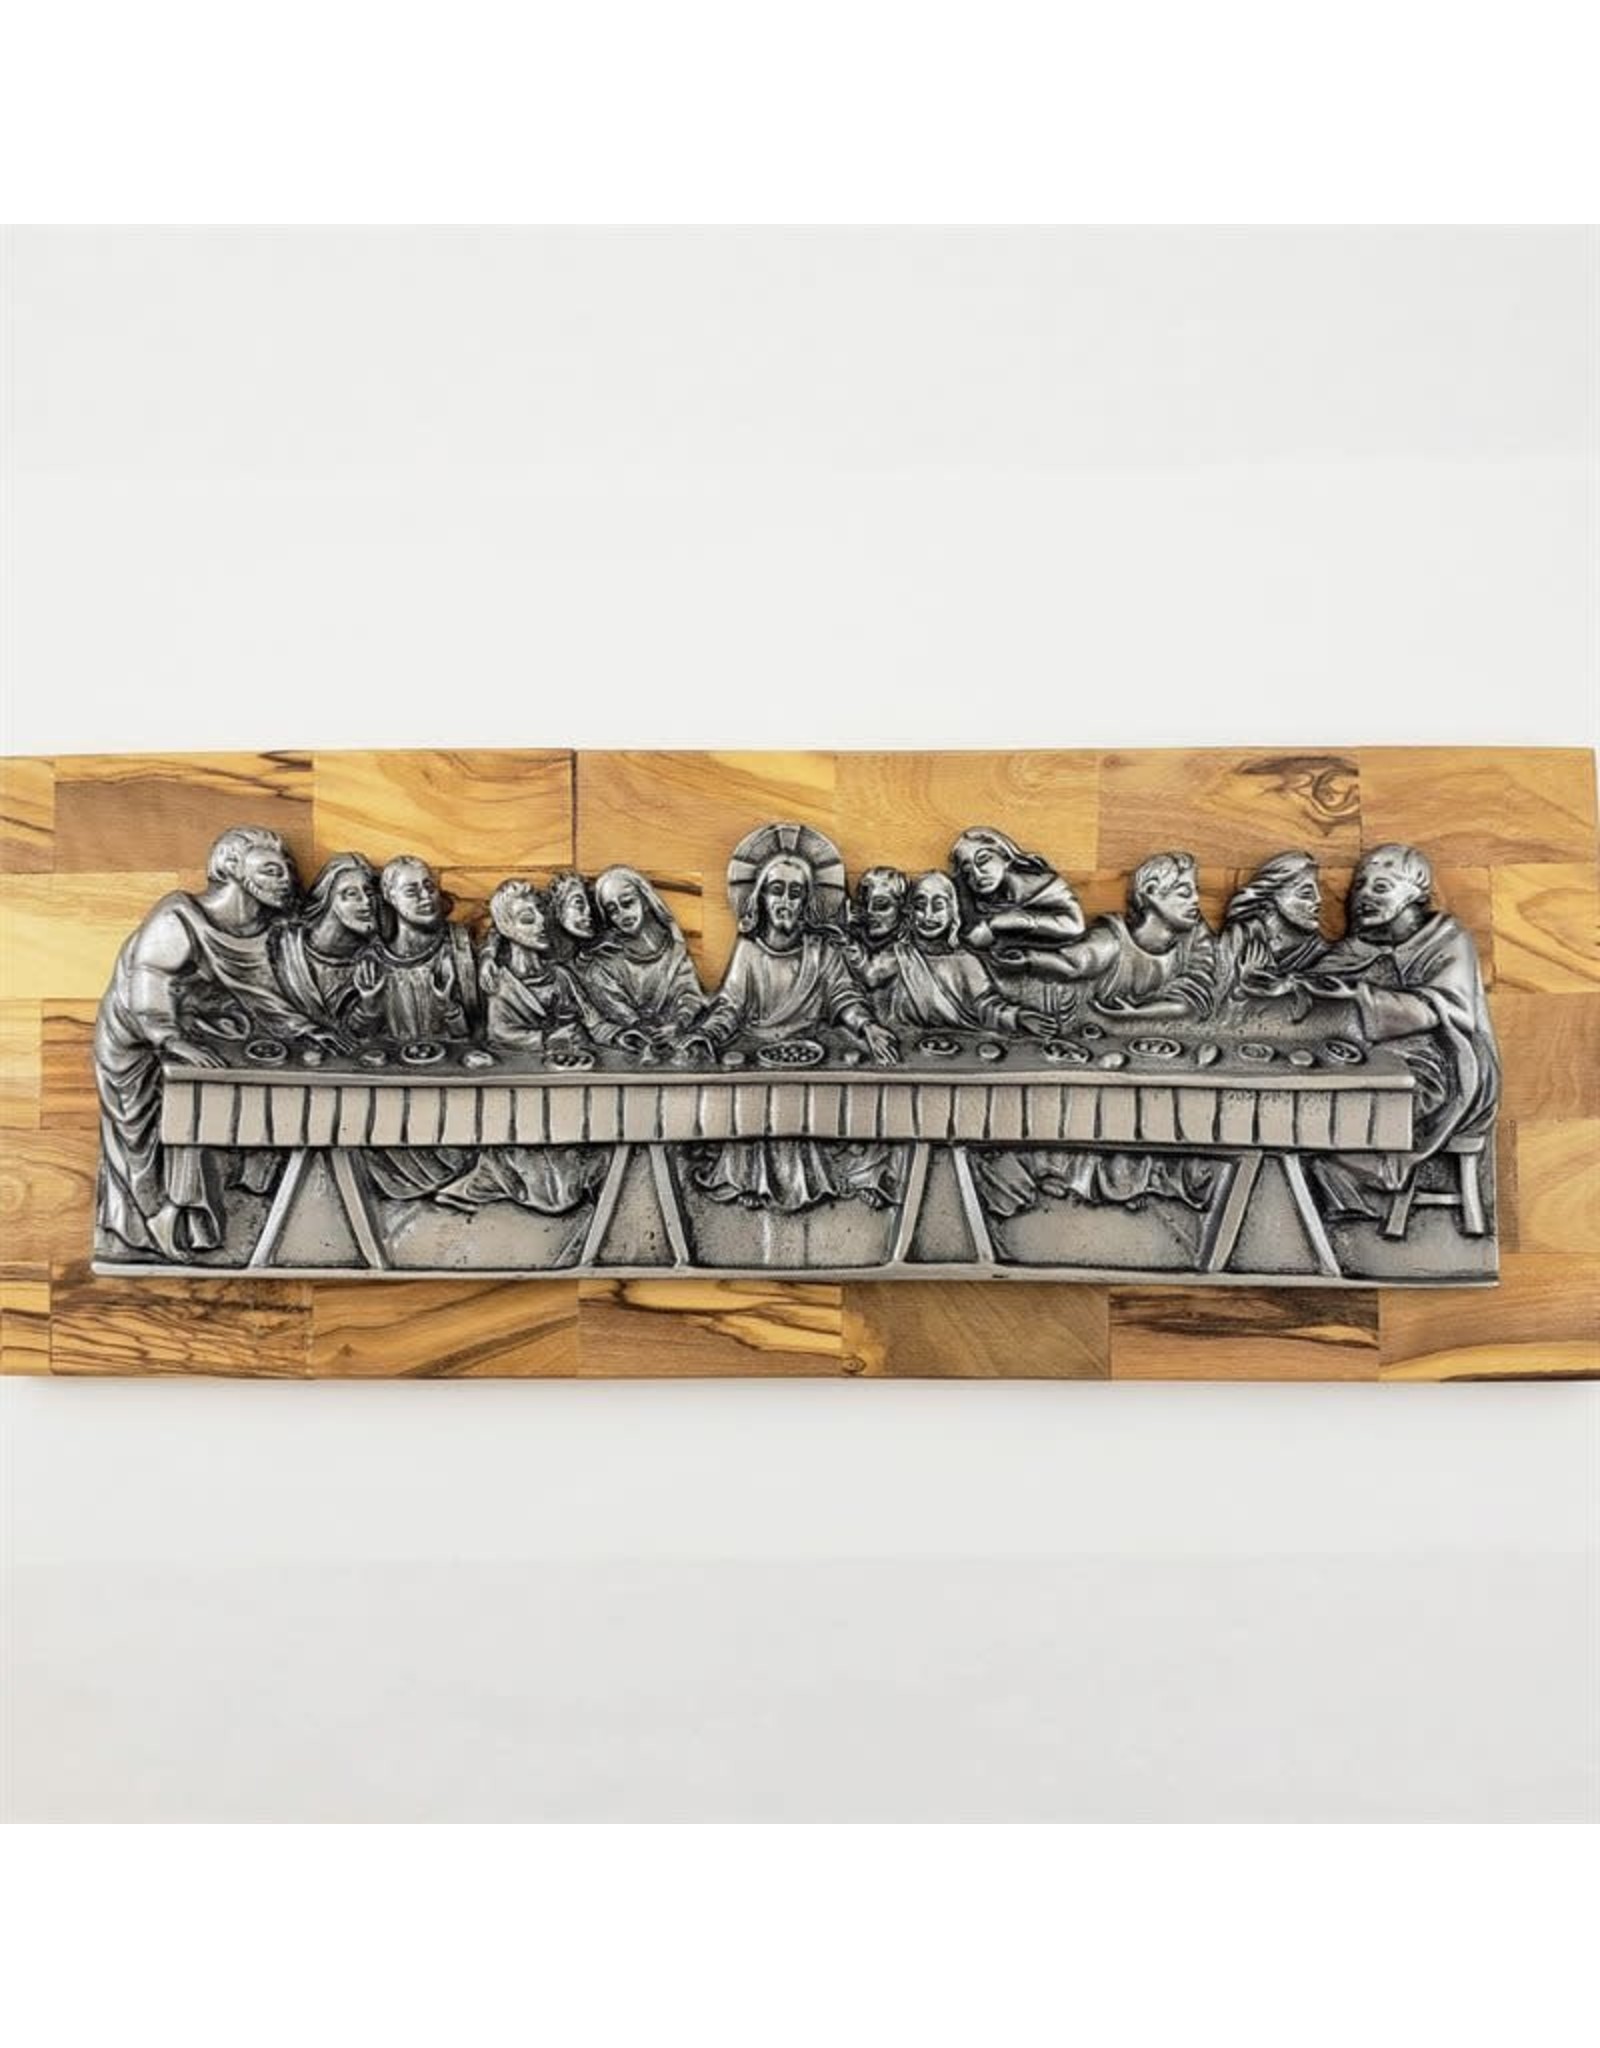 Shomali Last Supper  Plaque made of Olive Wood from the Holy Land